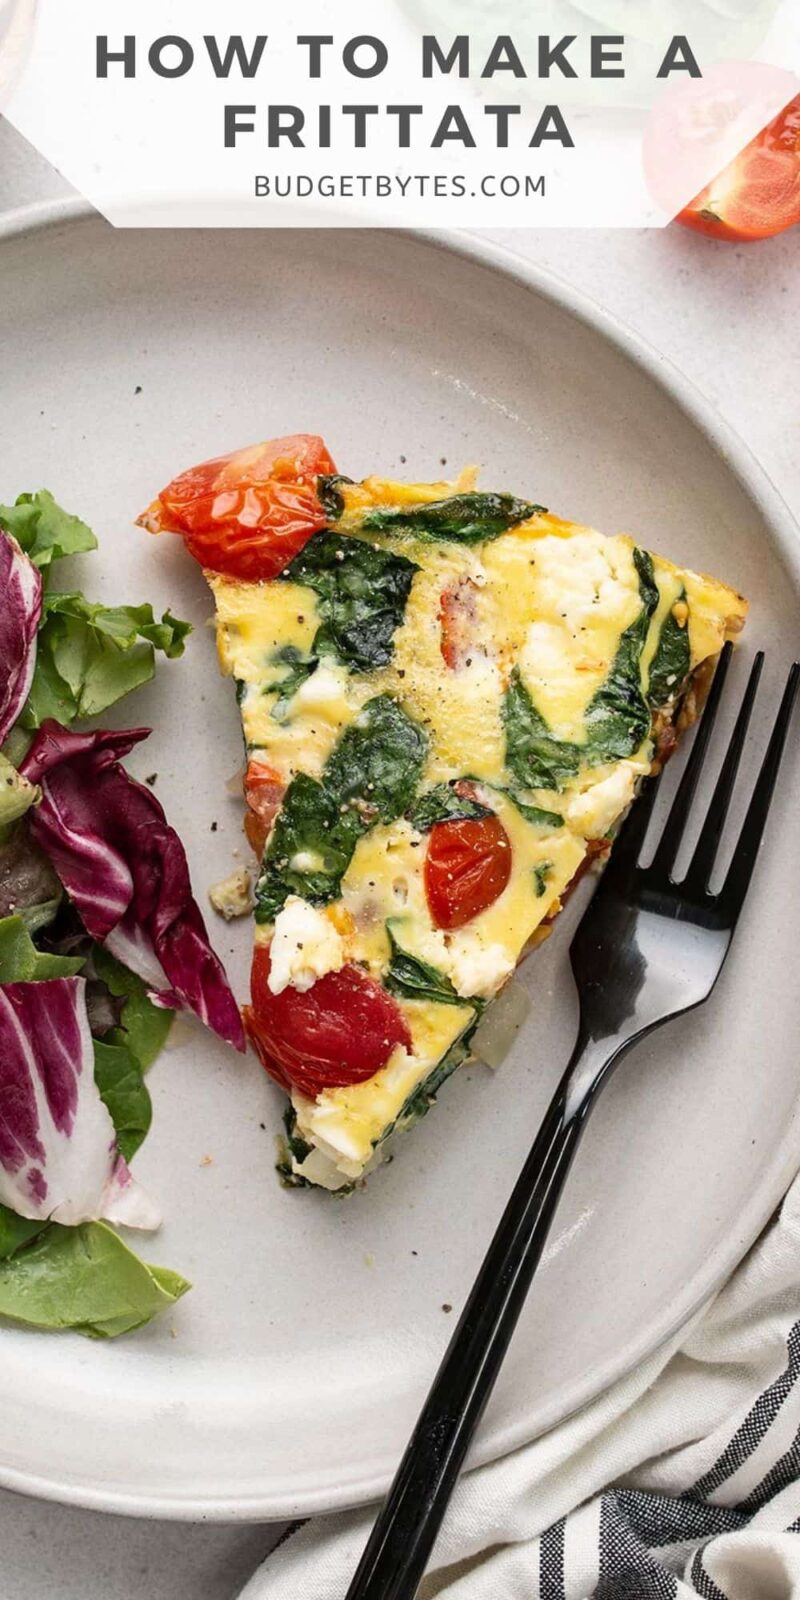 A slice of frittata on a plate with salad.